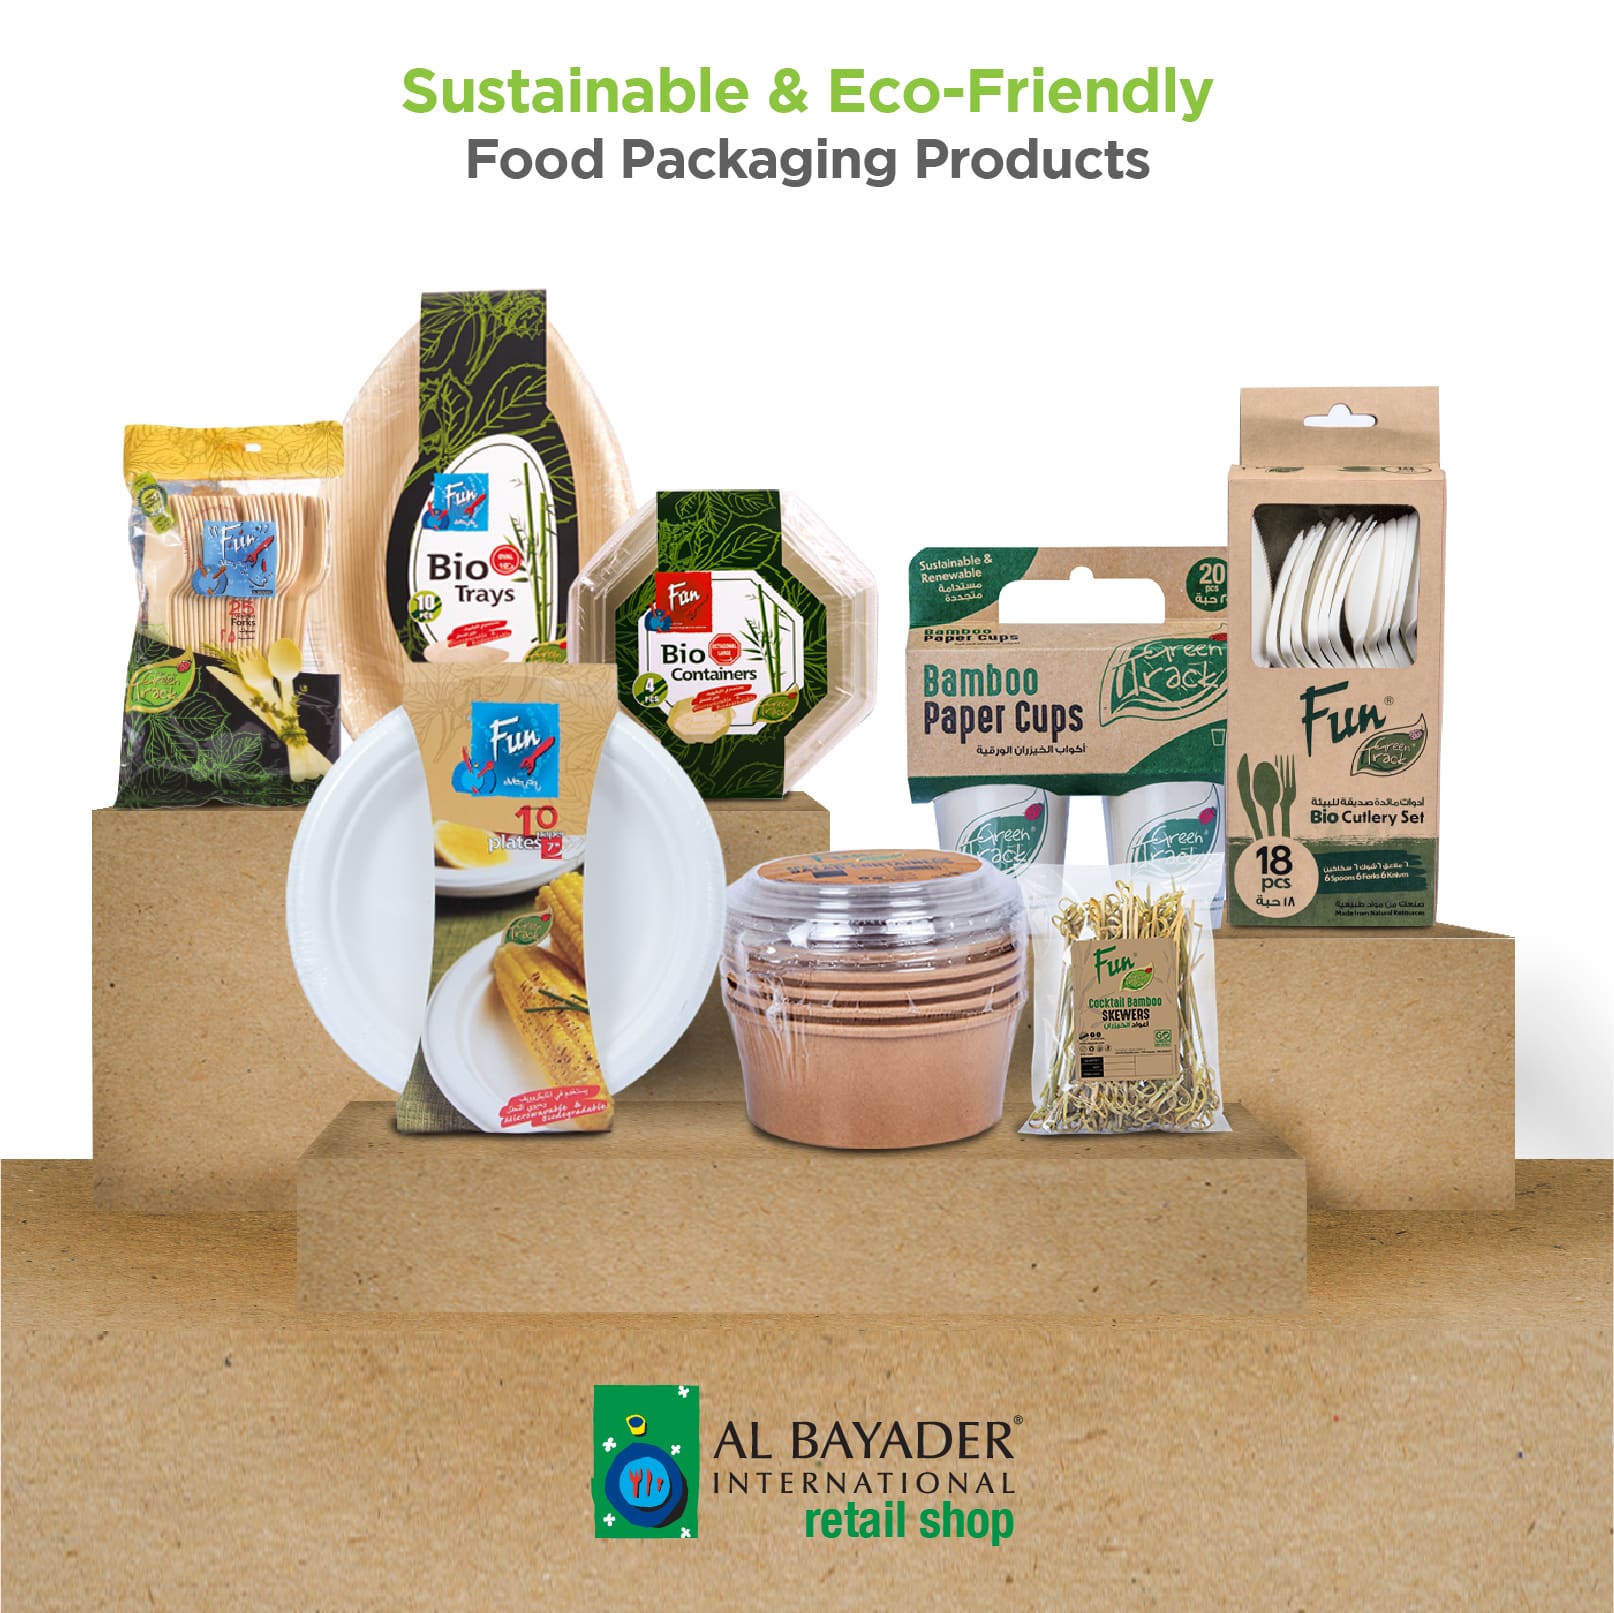 A group of Al Bayader eco-friendly products